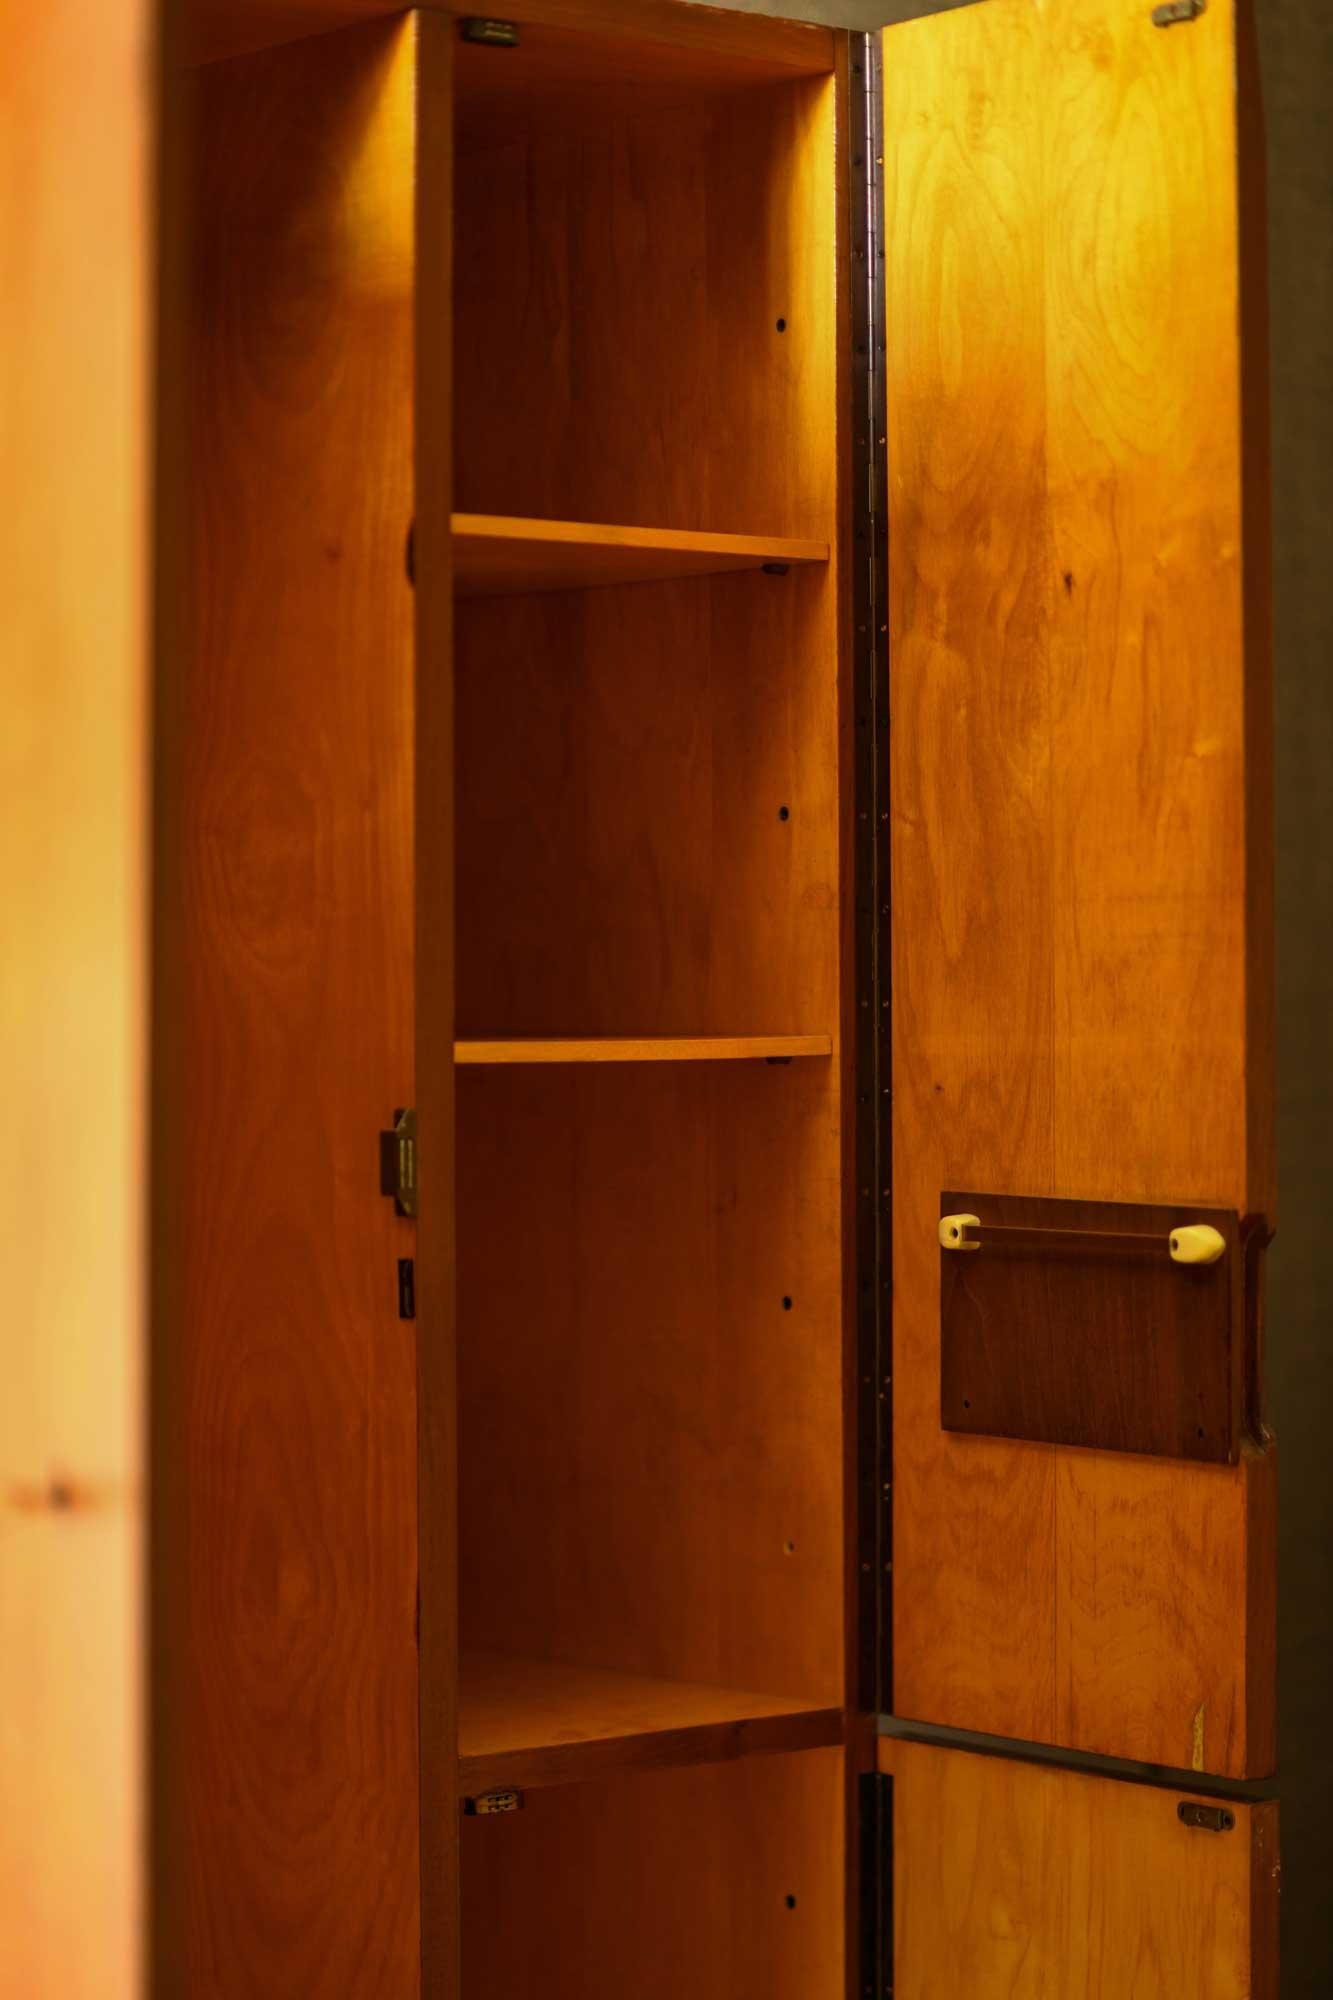 Italian Midcentury Wardrobe from the 1960s For Sale